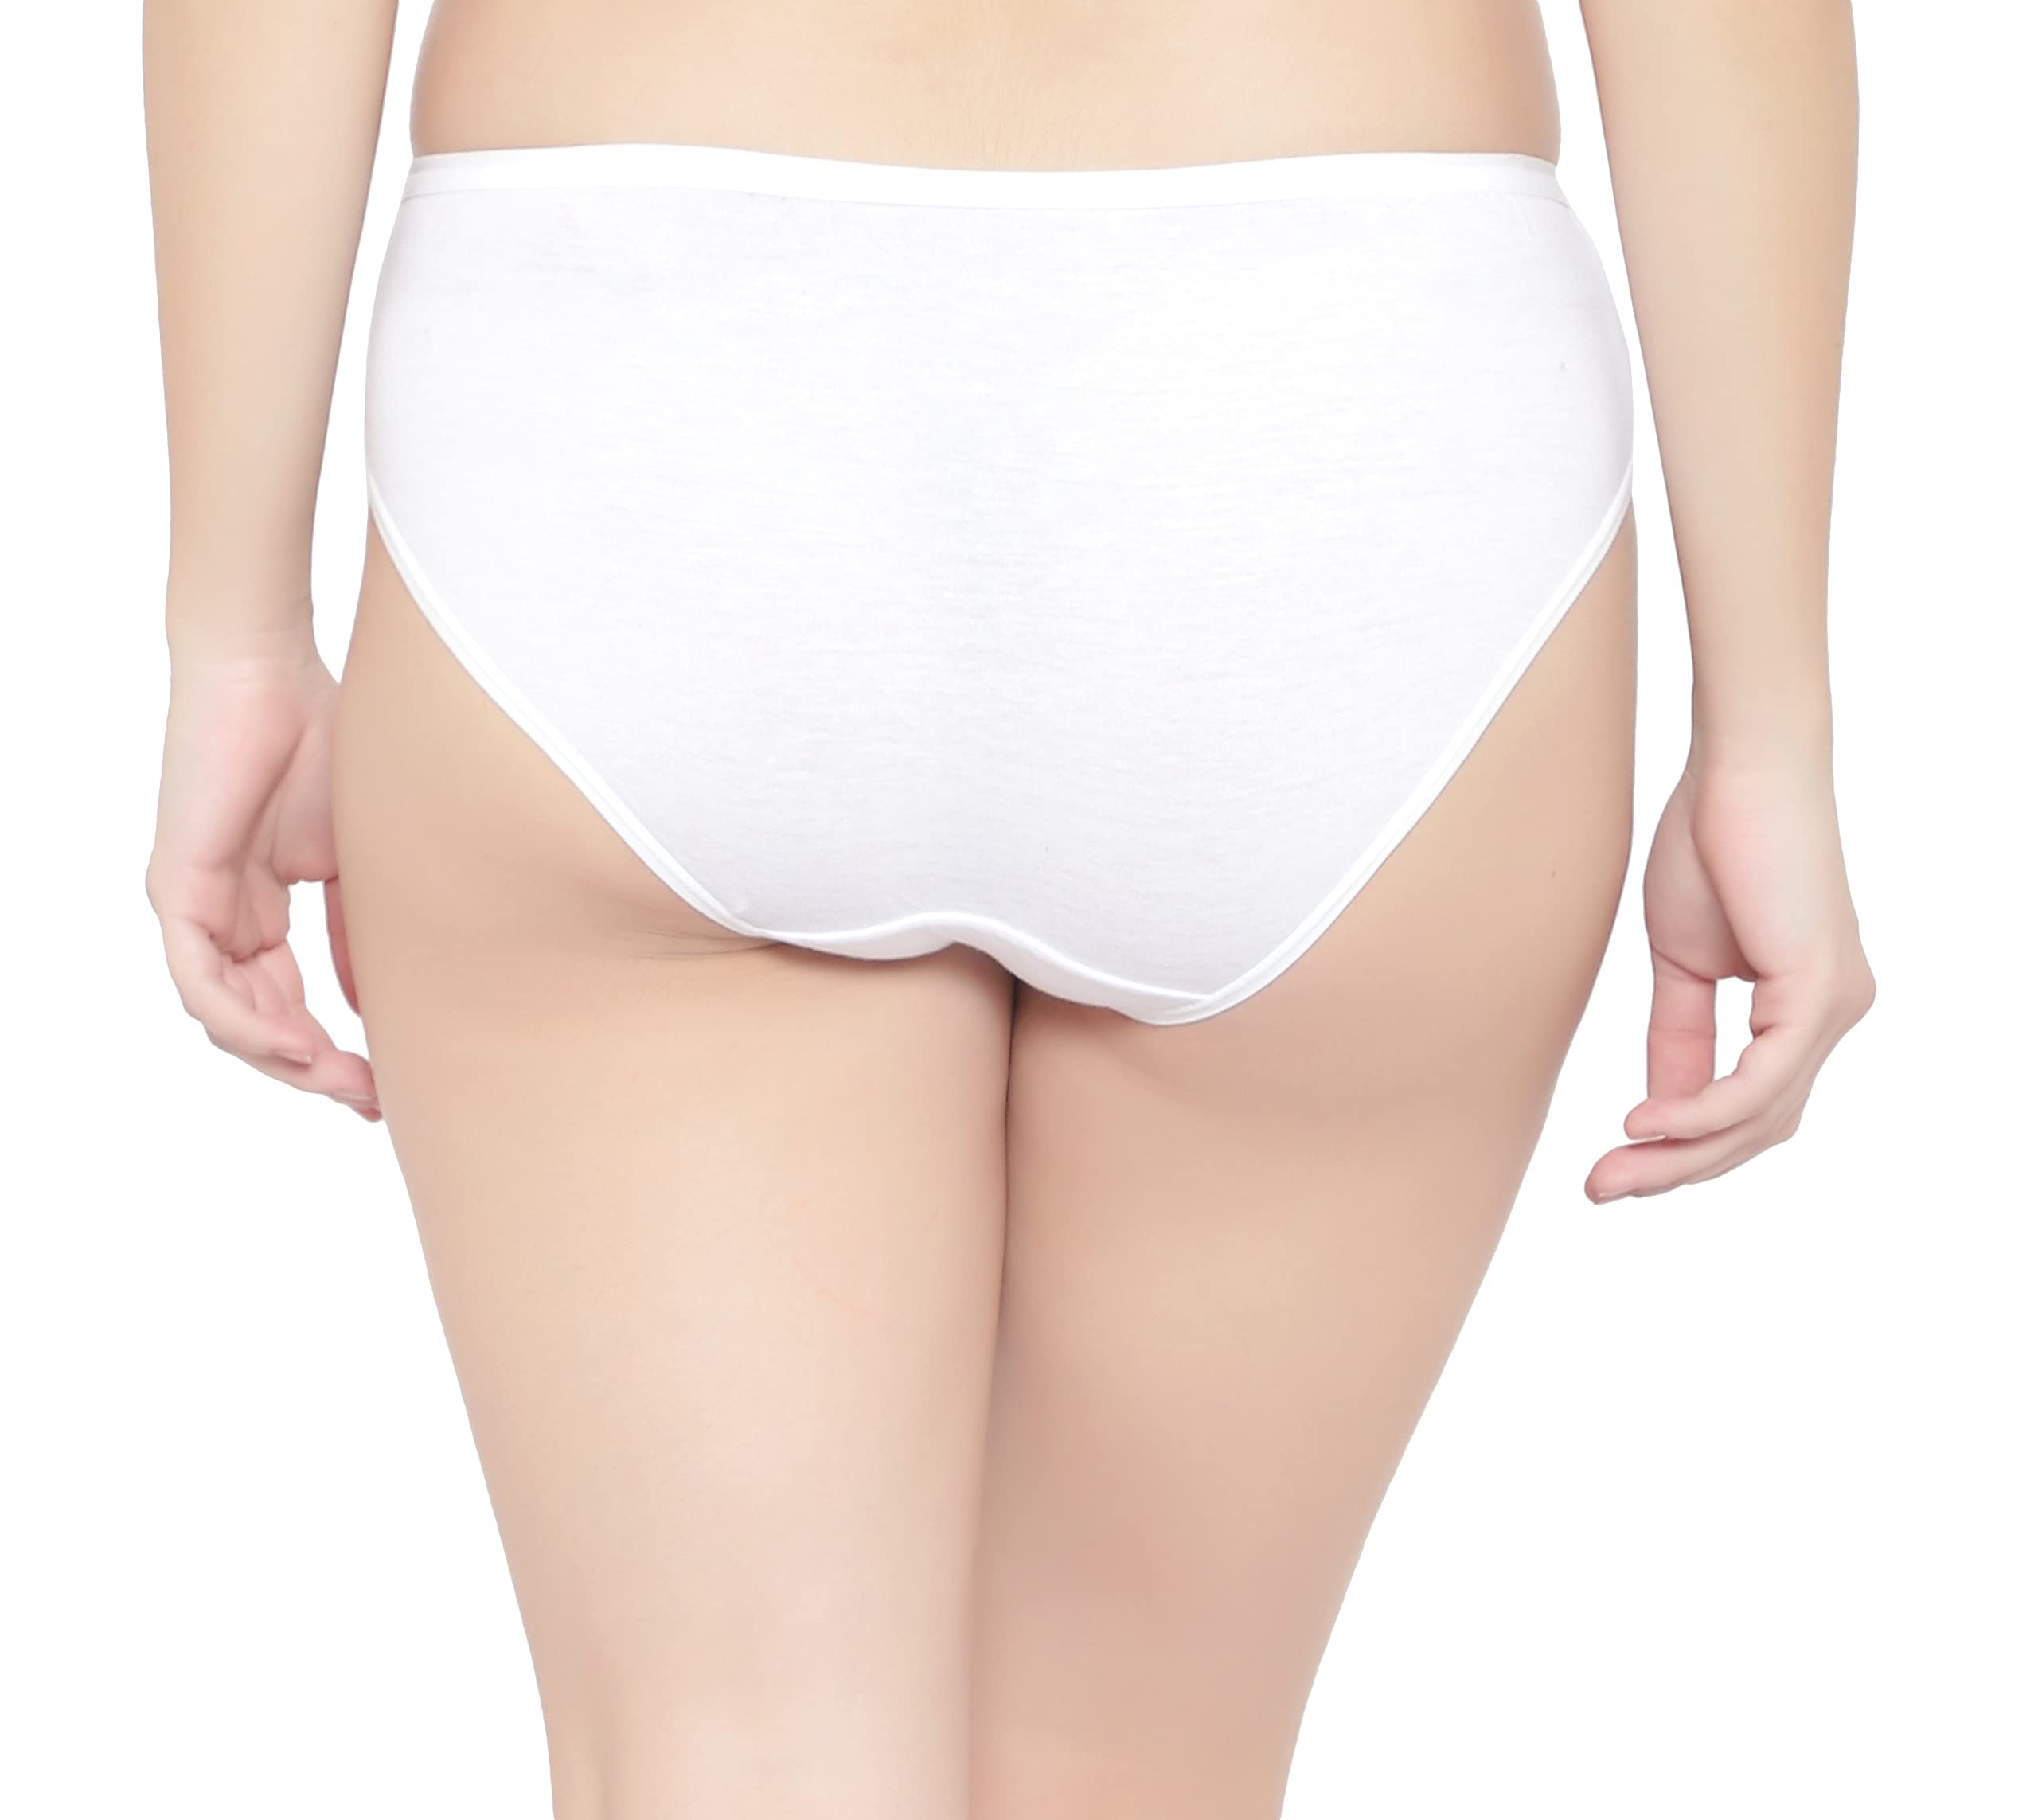 BLAZON Premium Women's and Girls Super Soft Cotton Hoisery Plain Mid Rise Hipster (Outer-Elastic) Panty |Combo Pack| Available Sizes: (S, M, L, XL, 2XL, 3XL, 4XL, 5XL) - White